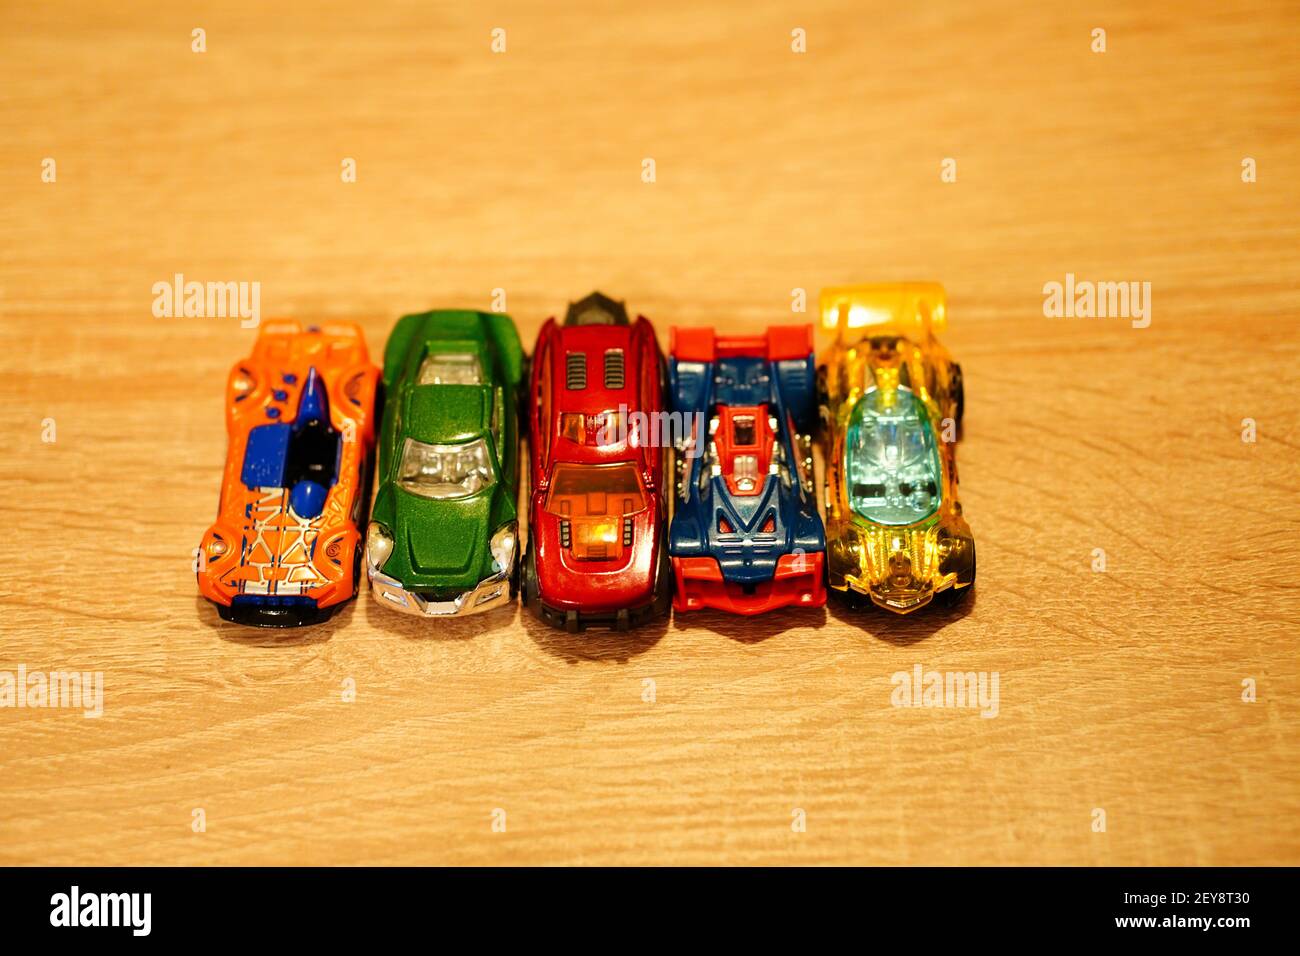 POZNAN, POLAND - Jan 28, 2021: Mattel Hot Wheels race toy model cars on a wooden  table in soft focus Stock Photo - Alamy